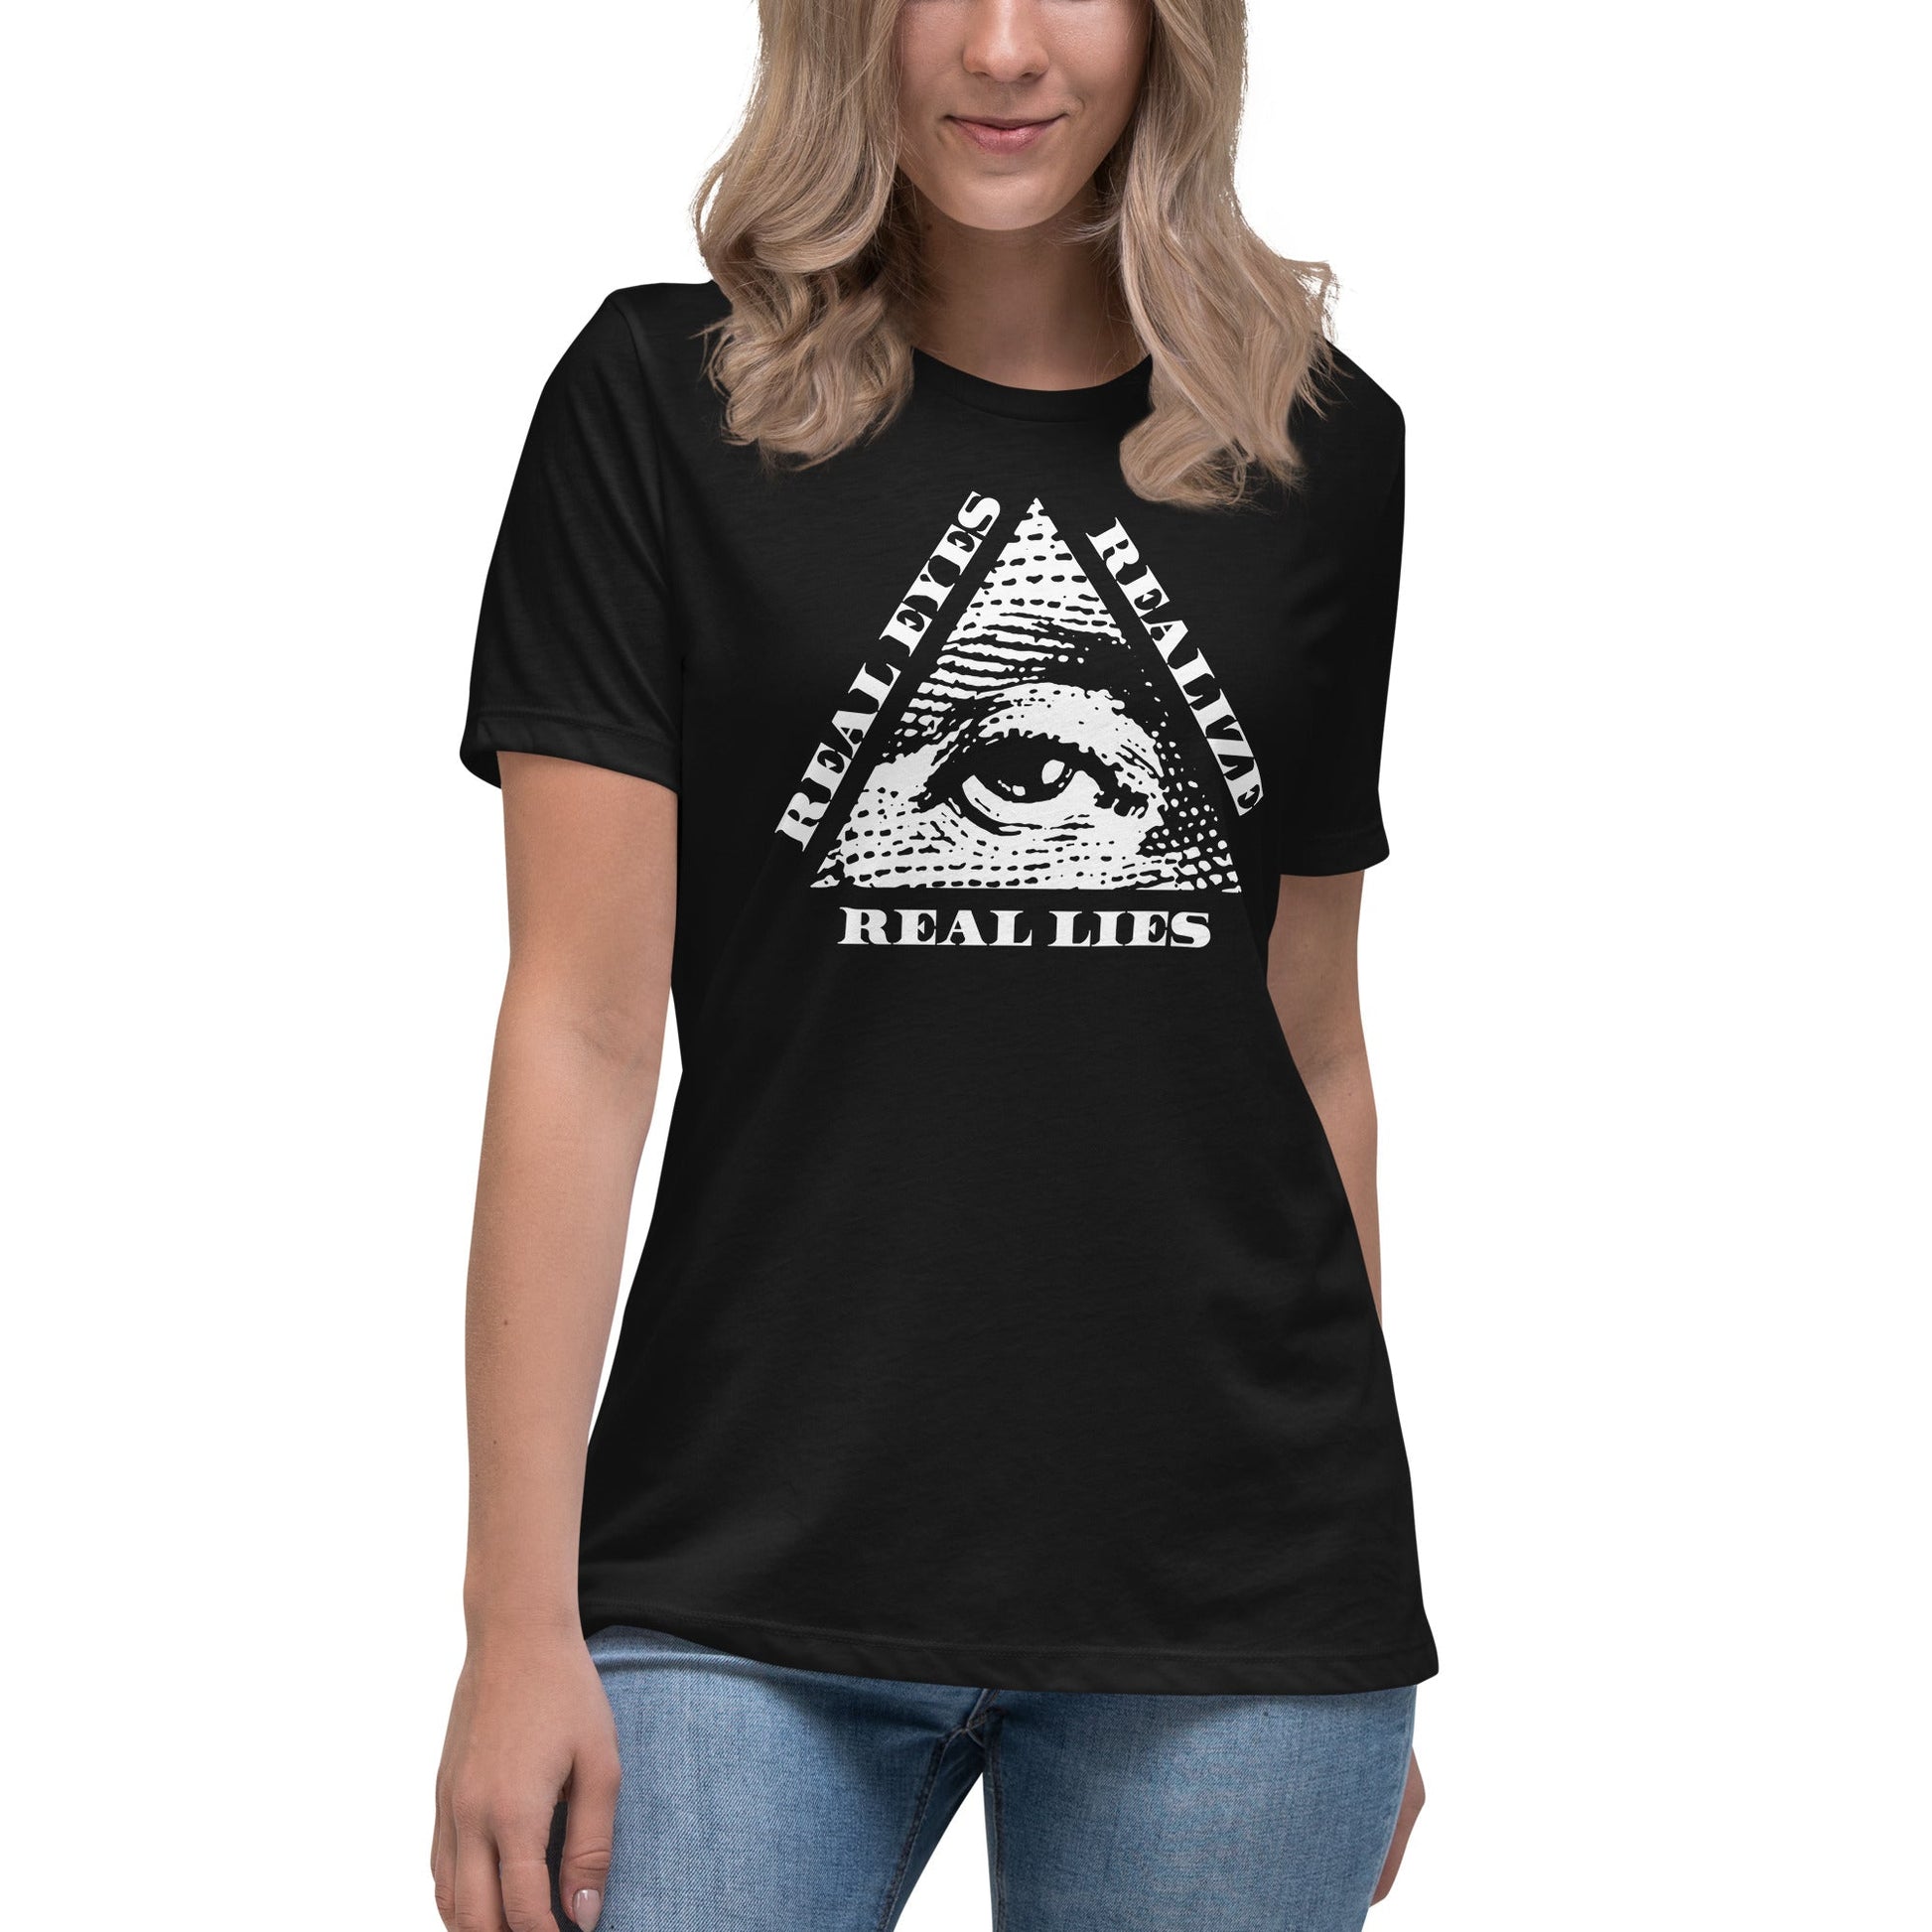 Real Eyes Realize Real Lies - All seeing eye - Women's T-Shirt